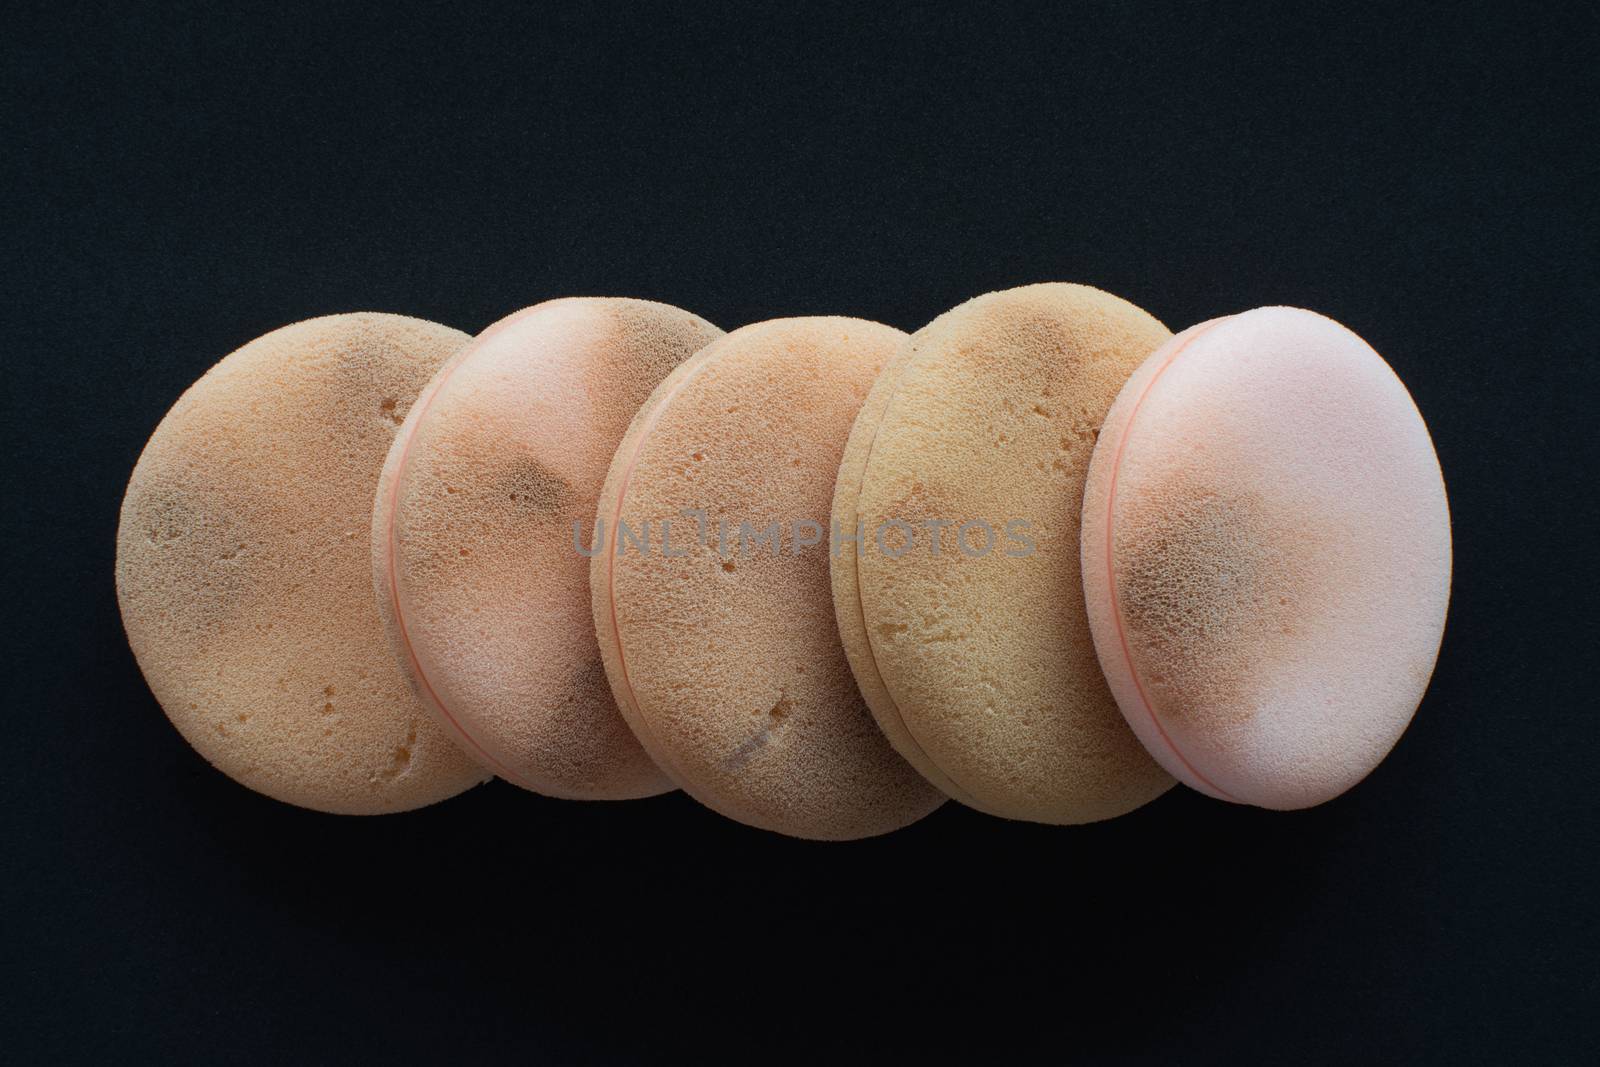 cosmetic sponges used on black background